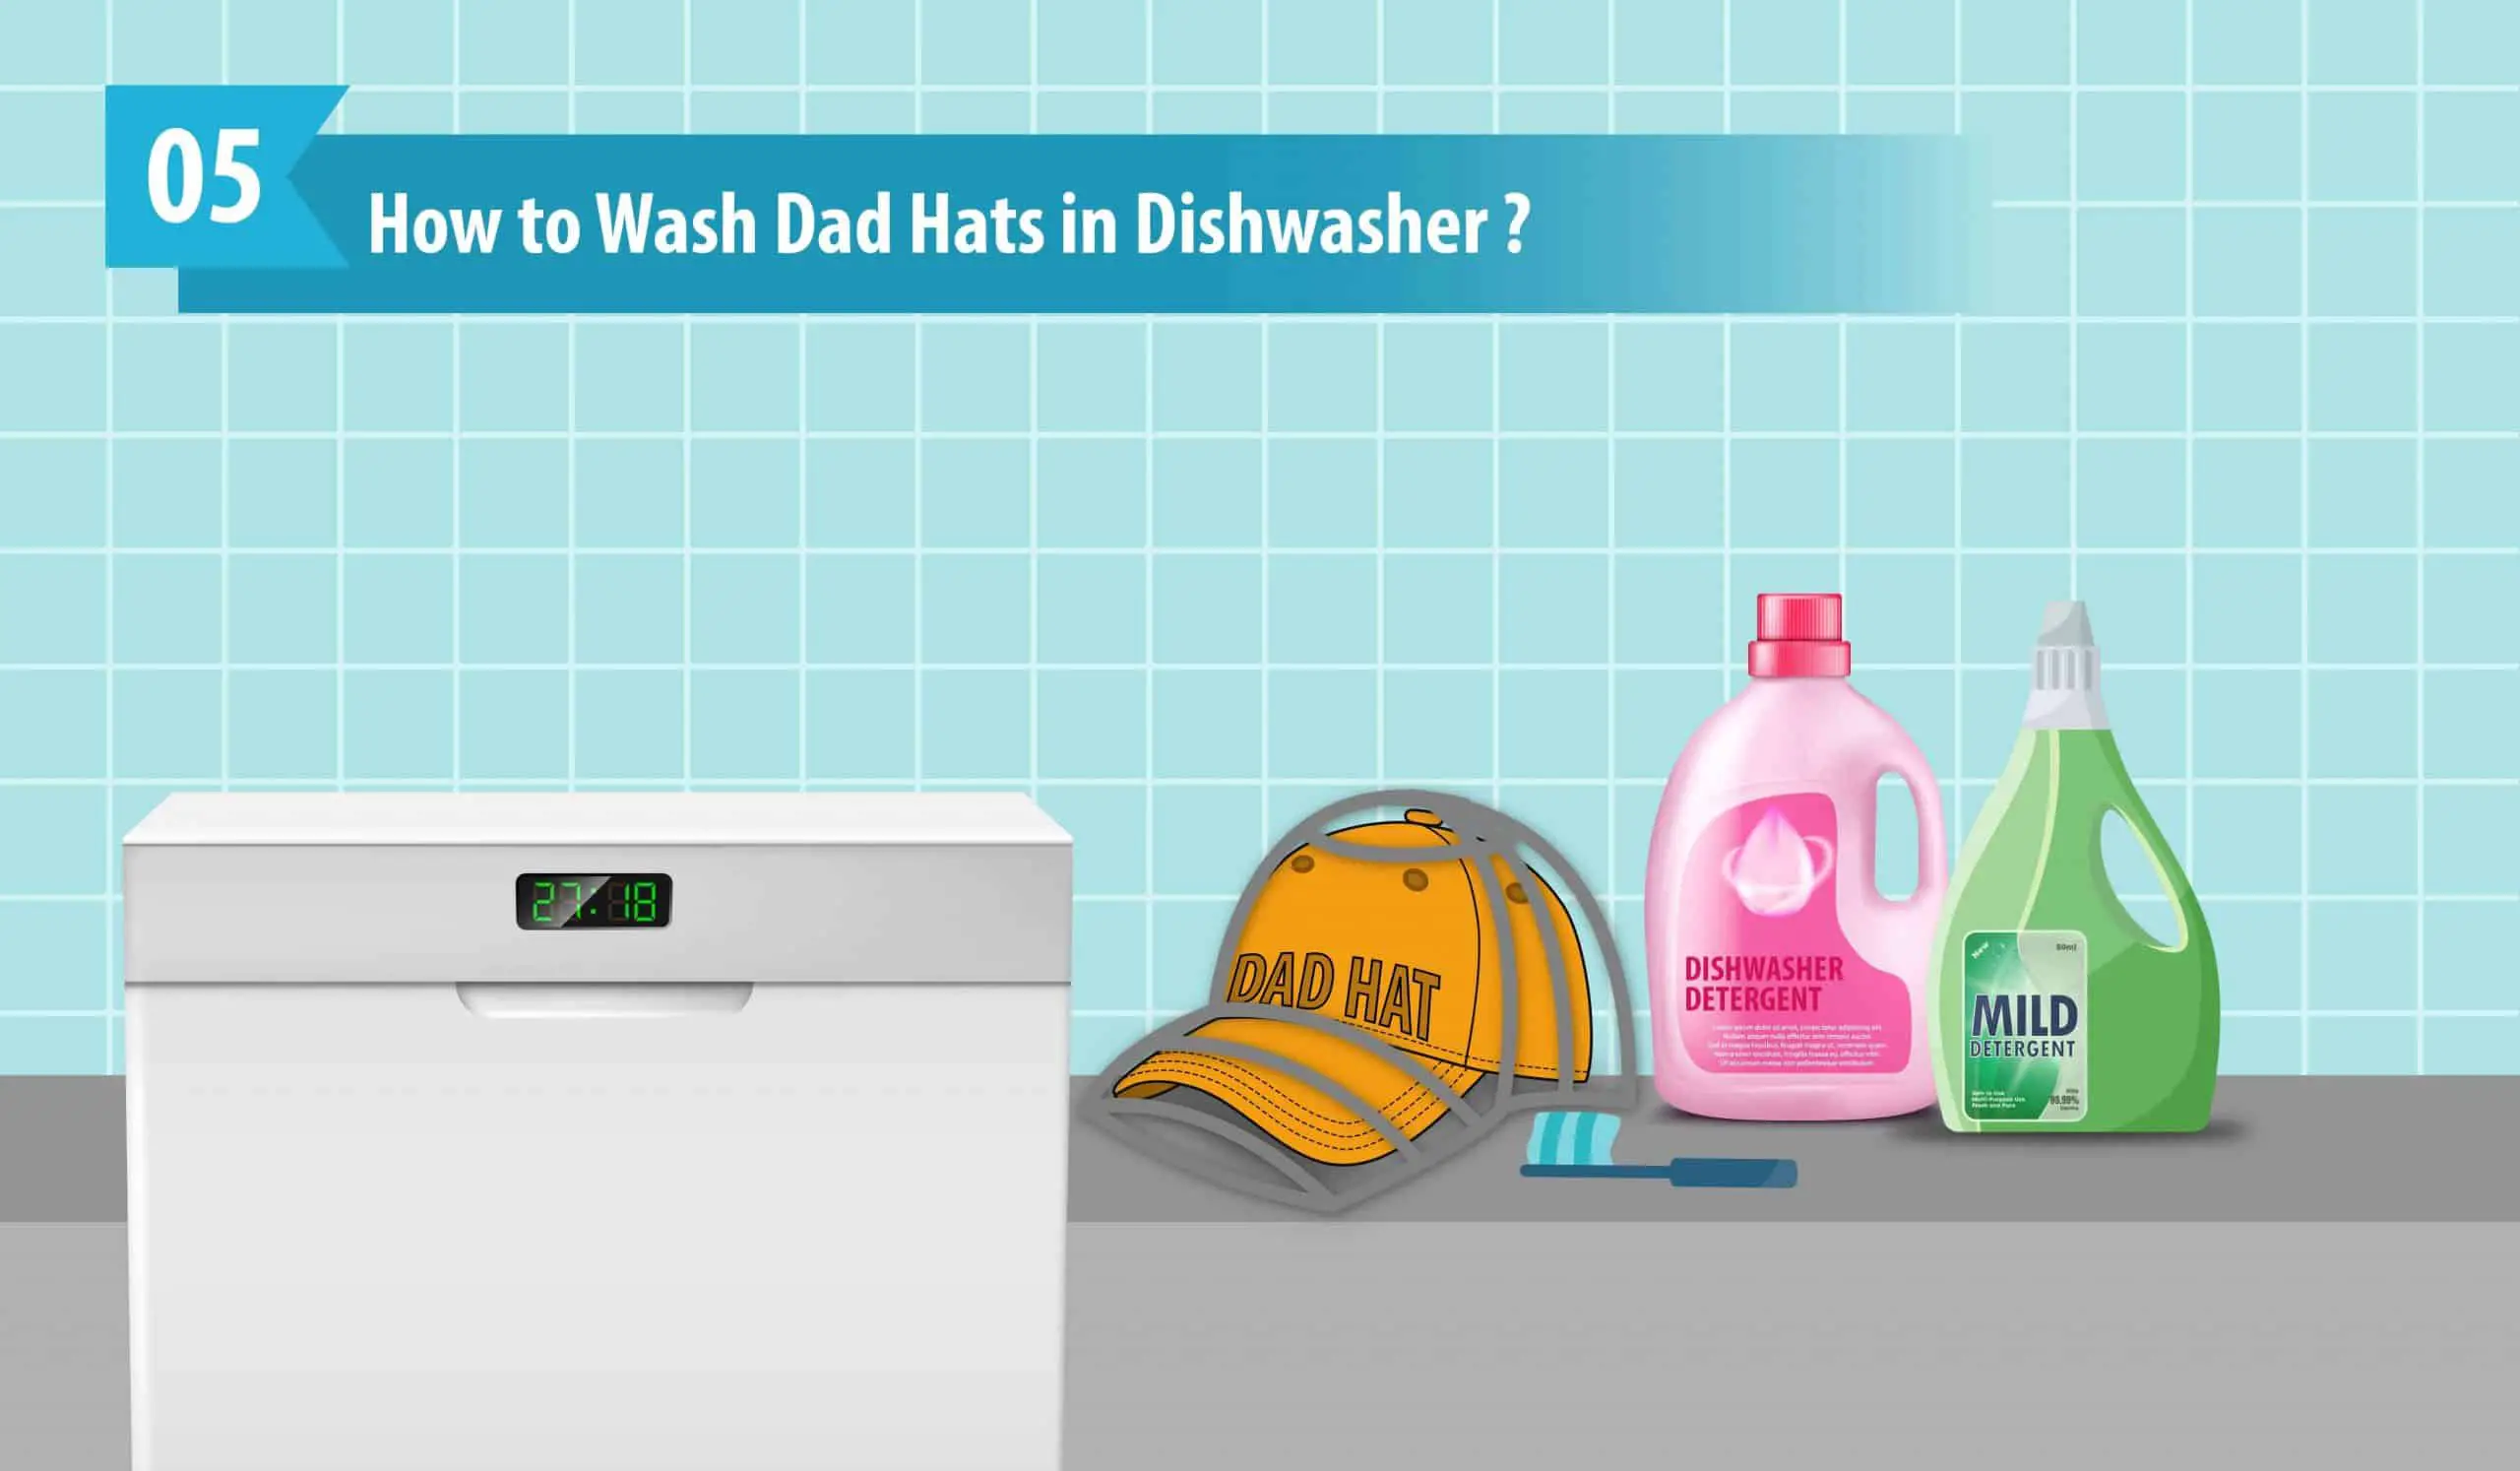 How to Wash Dad Hats in Dishwasher